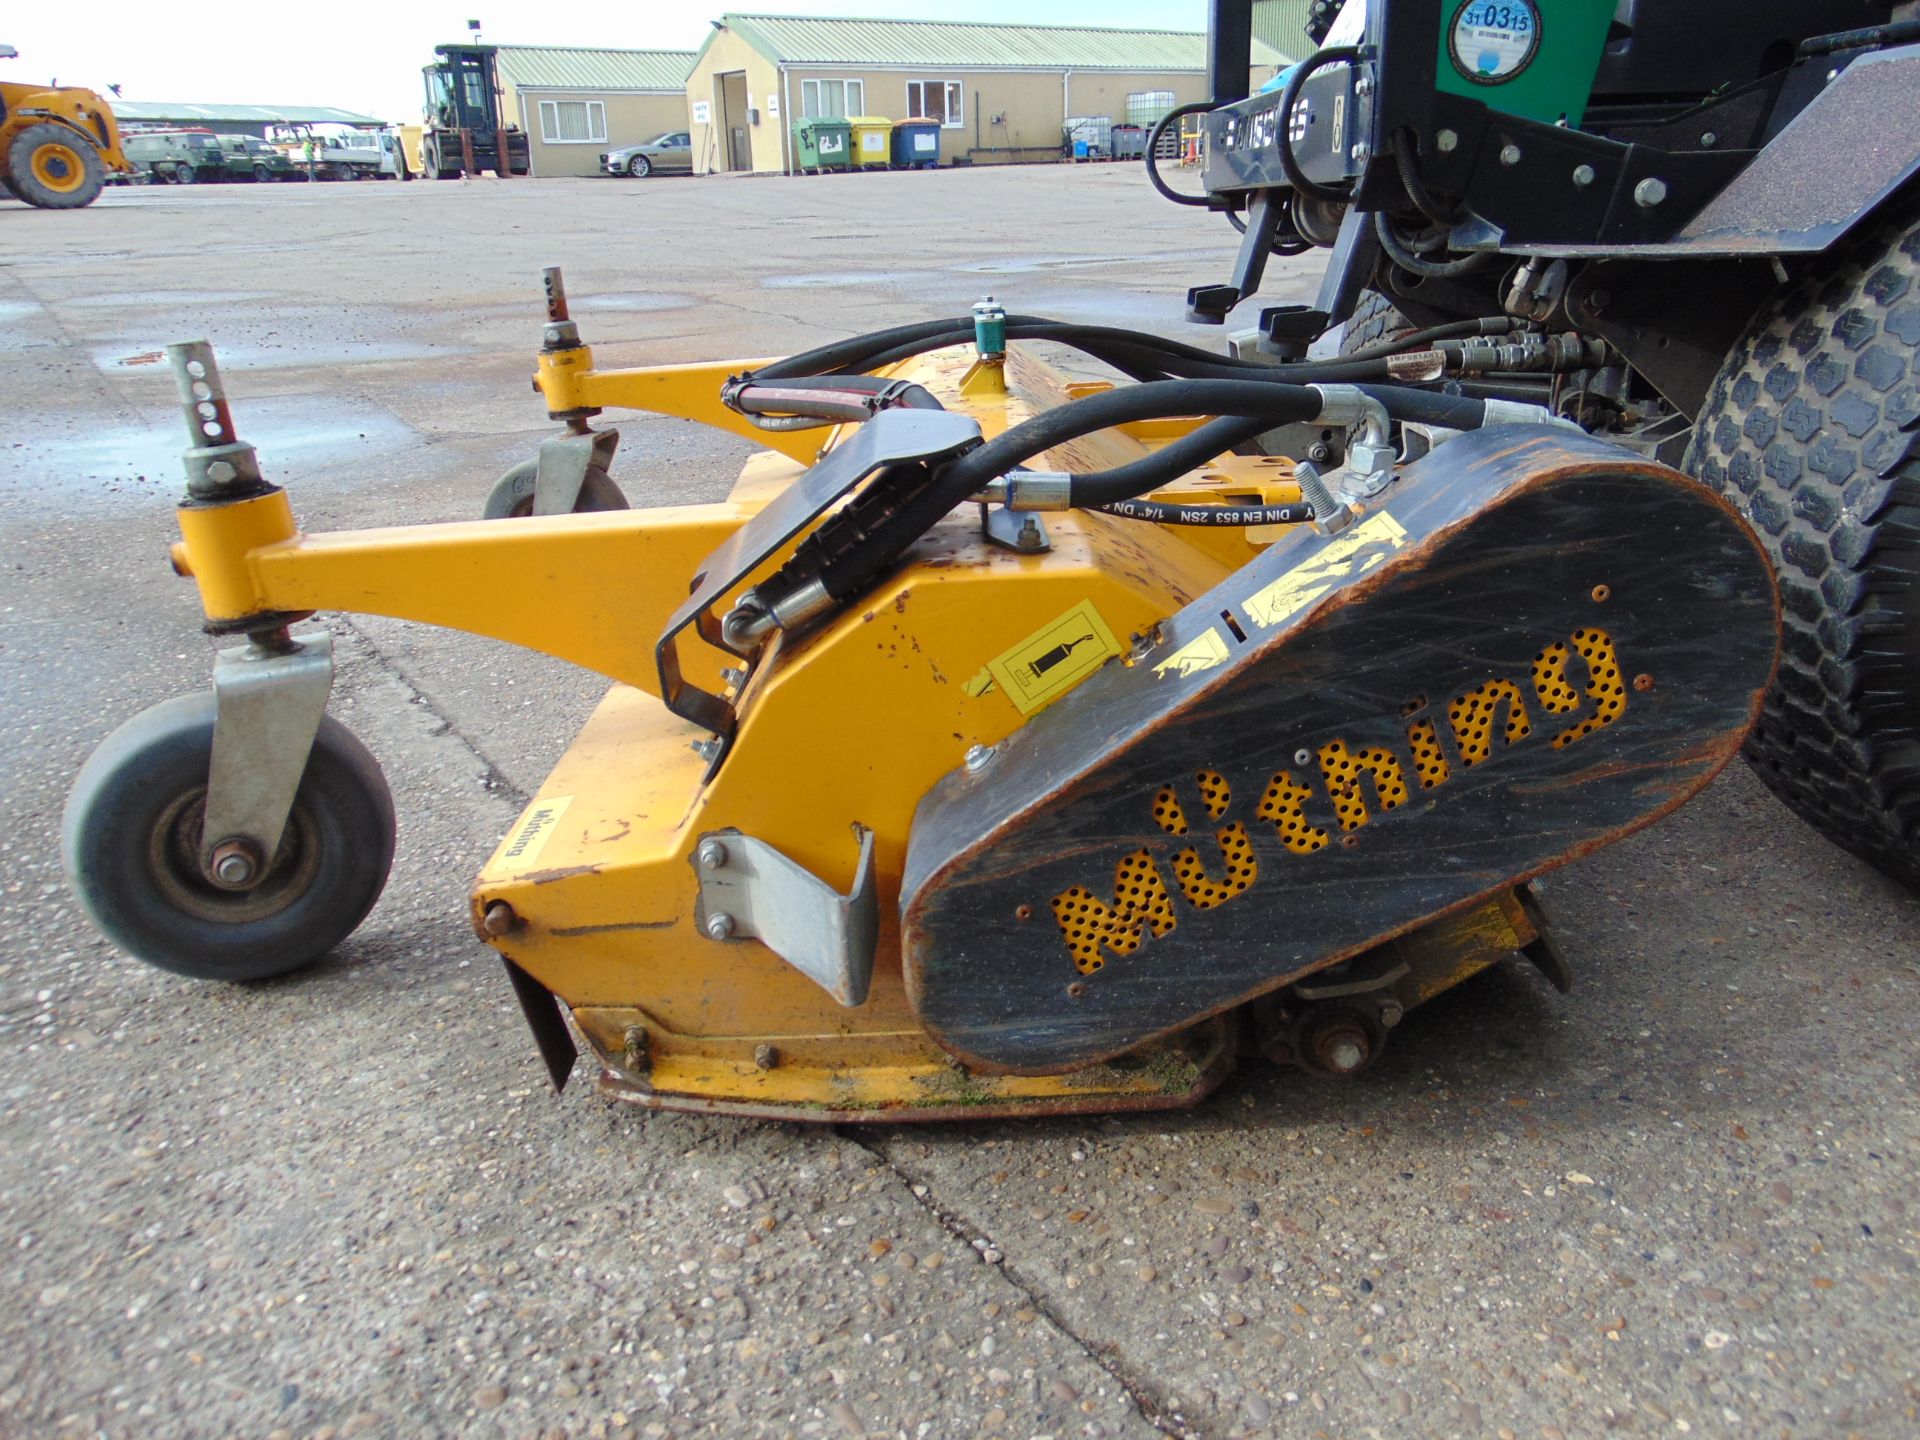 2014 Ransomes HR300 C/W Muthing Outfront Flail Mower ONLY 2,203 HOURS! - Image 11 of 26